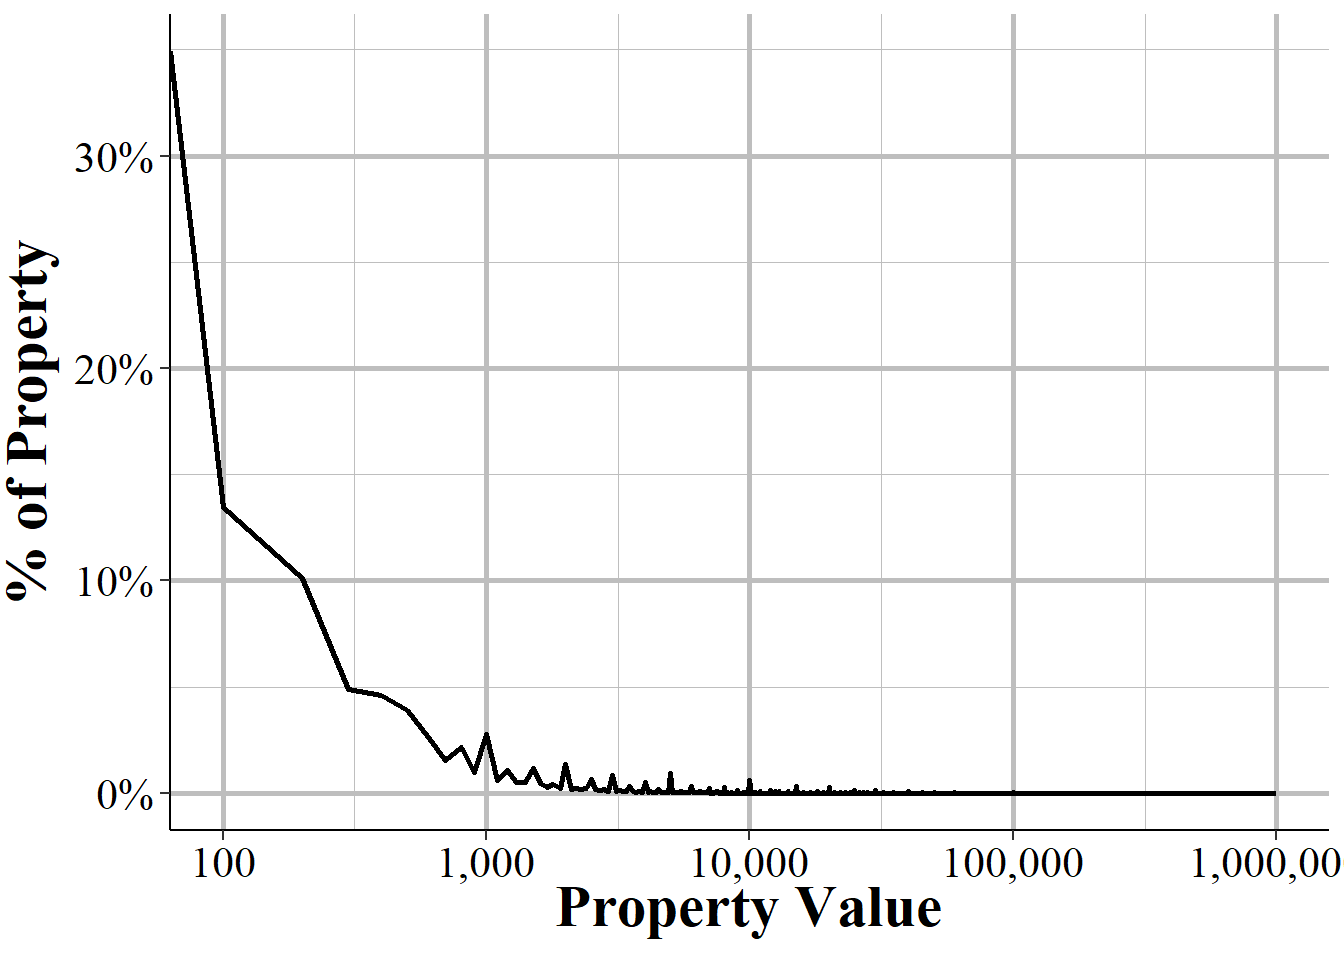 The distribution of the value of property stolen. Values are capped at 1,000,000 and each value is rounded to the nearest 100. The x-axis is set on the log scale as this distribution is hugely right skewed.